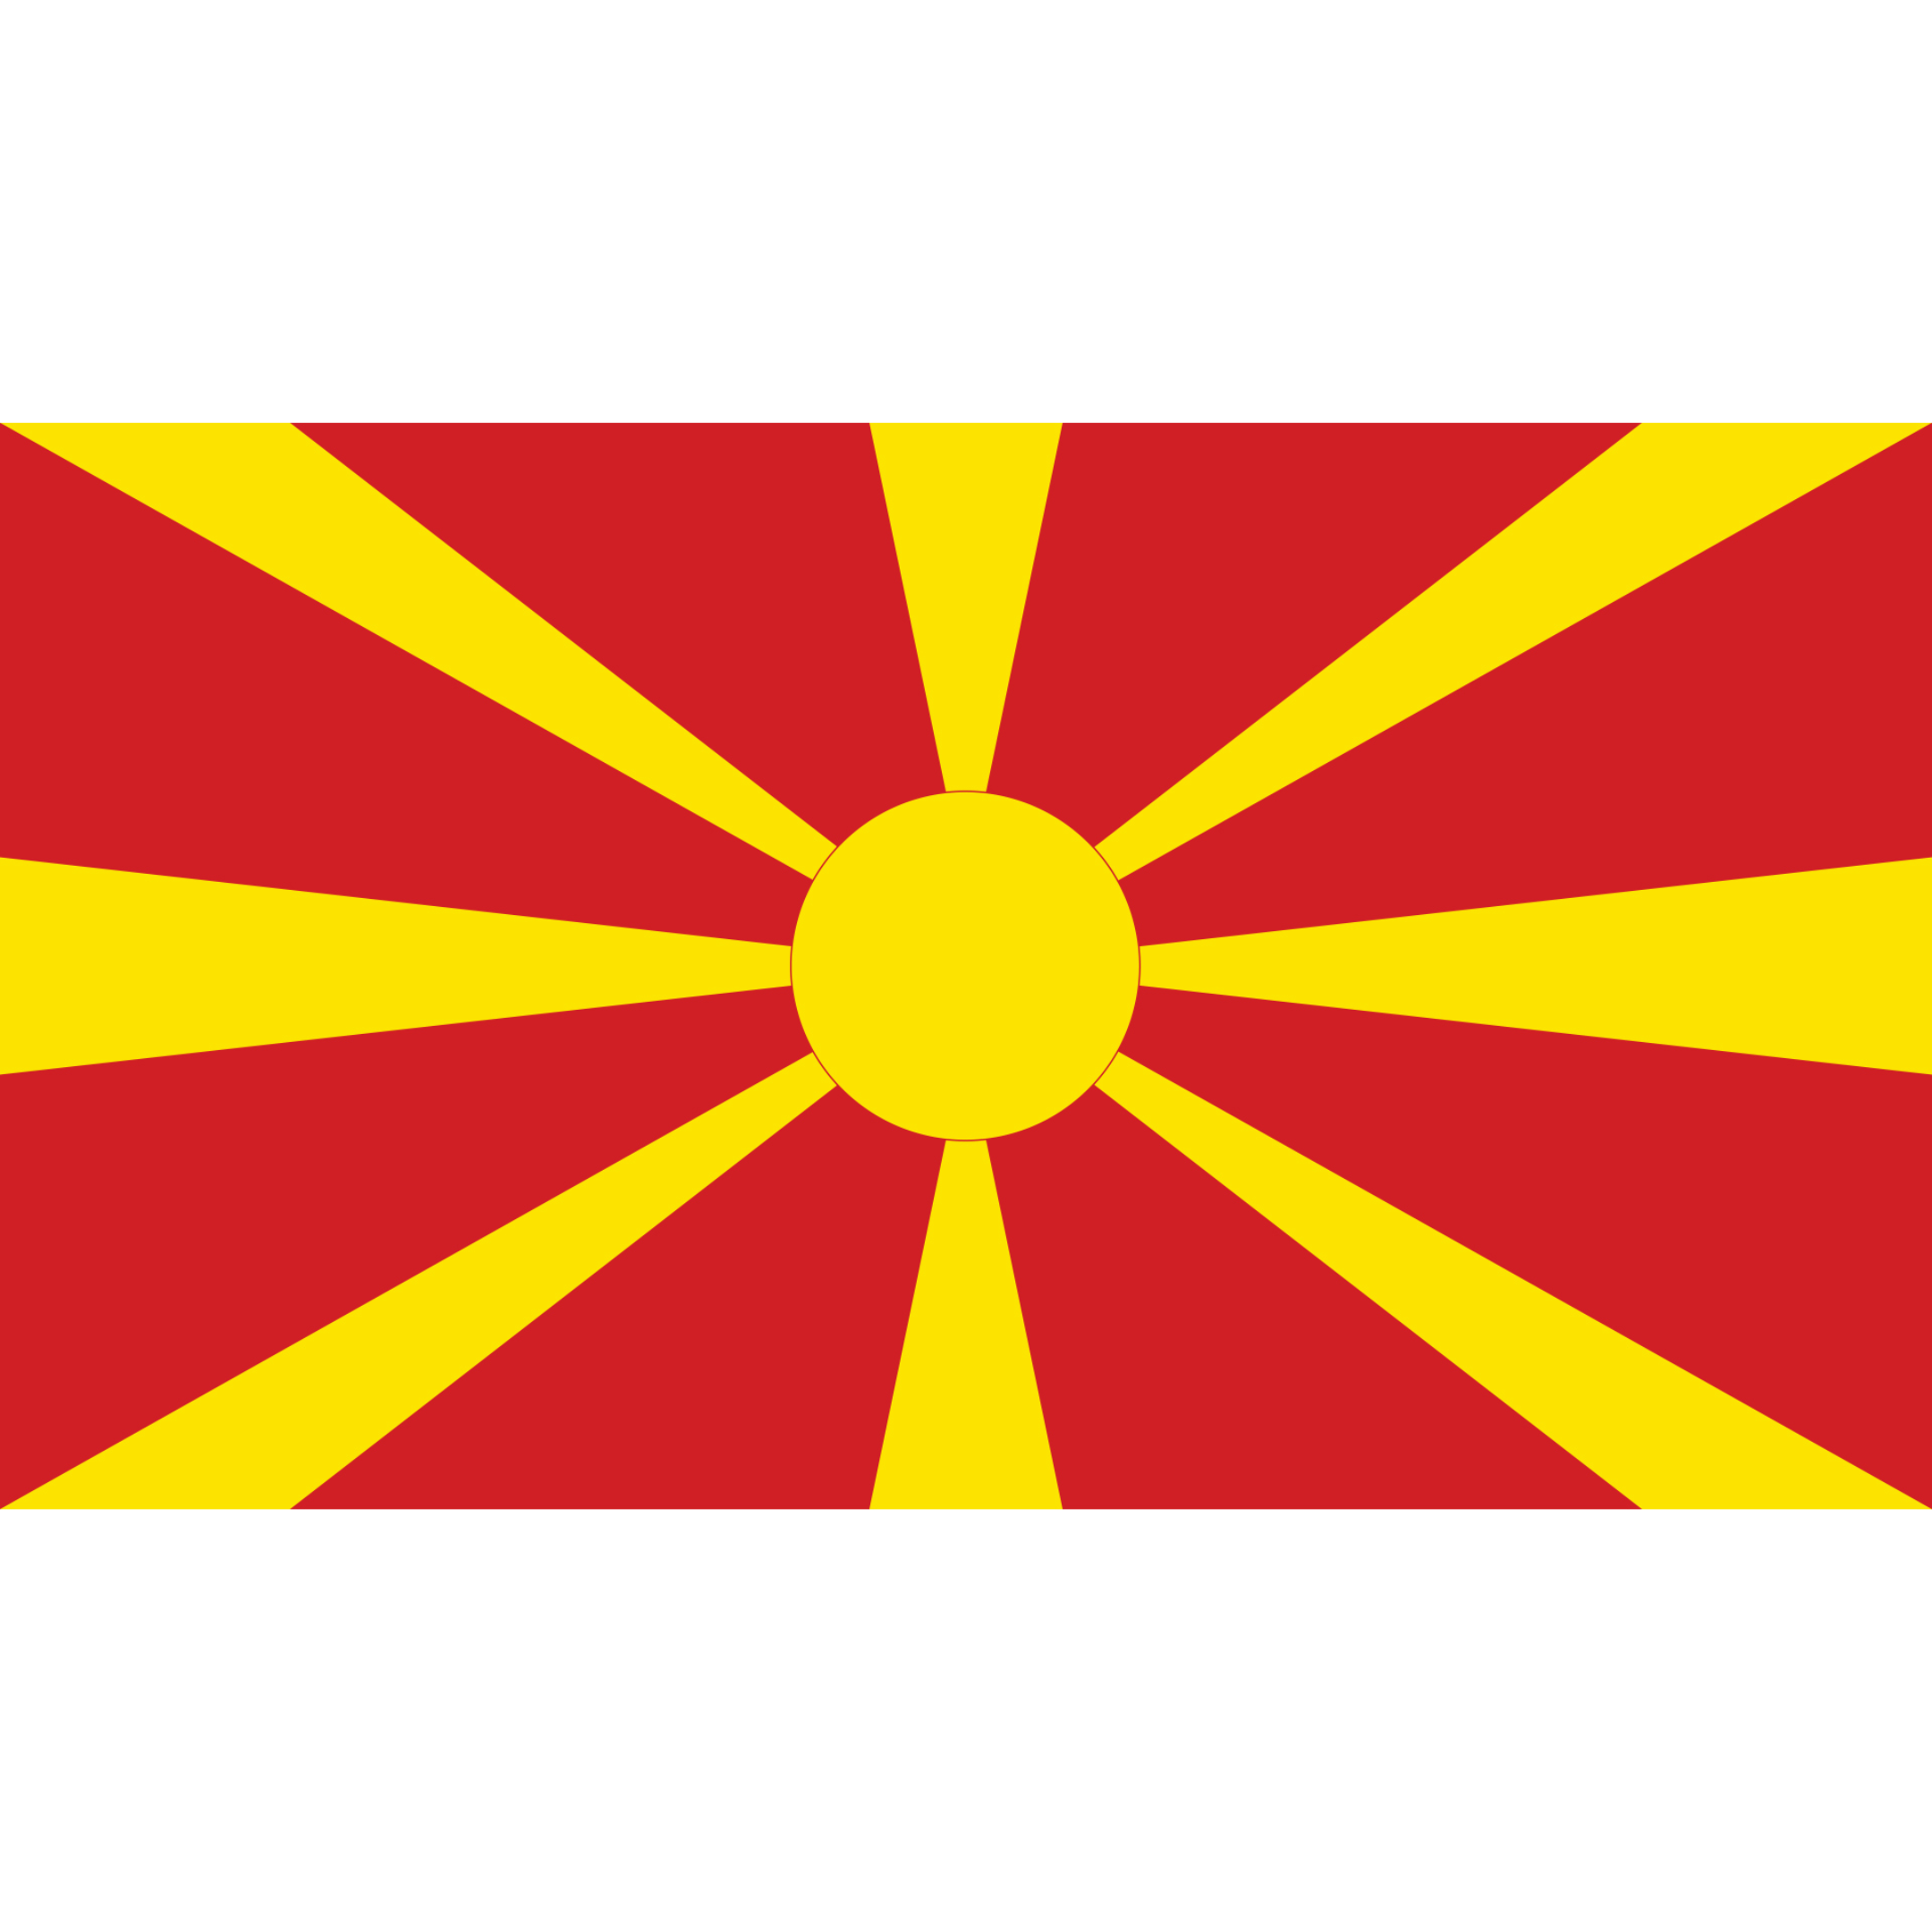 The Macedonia Flag has a red background and a large yellow sun in the centre, with eight rays.